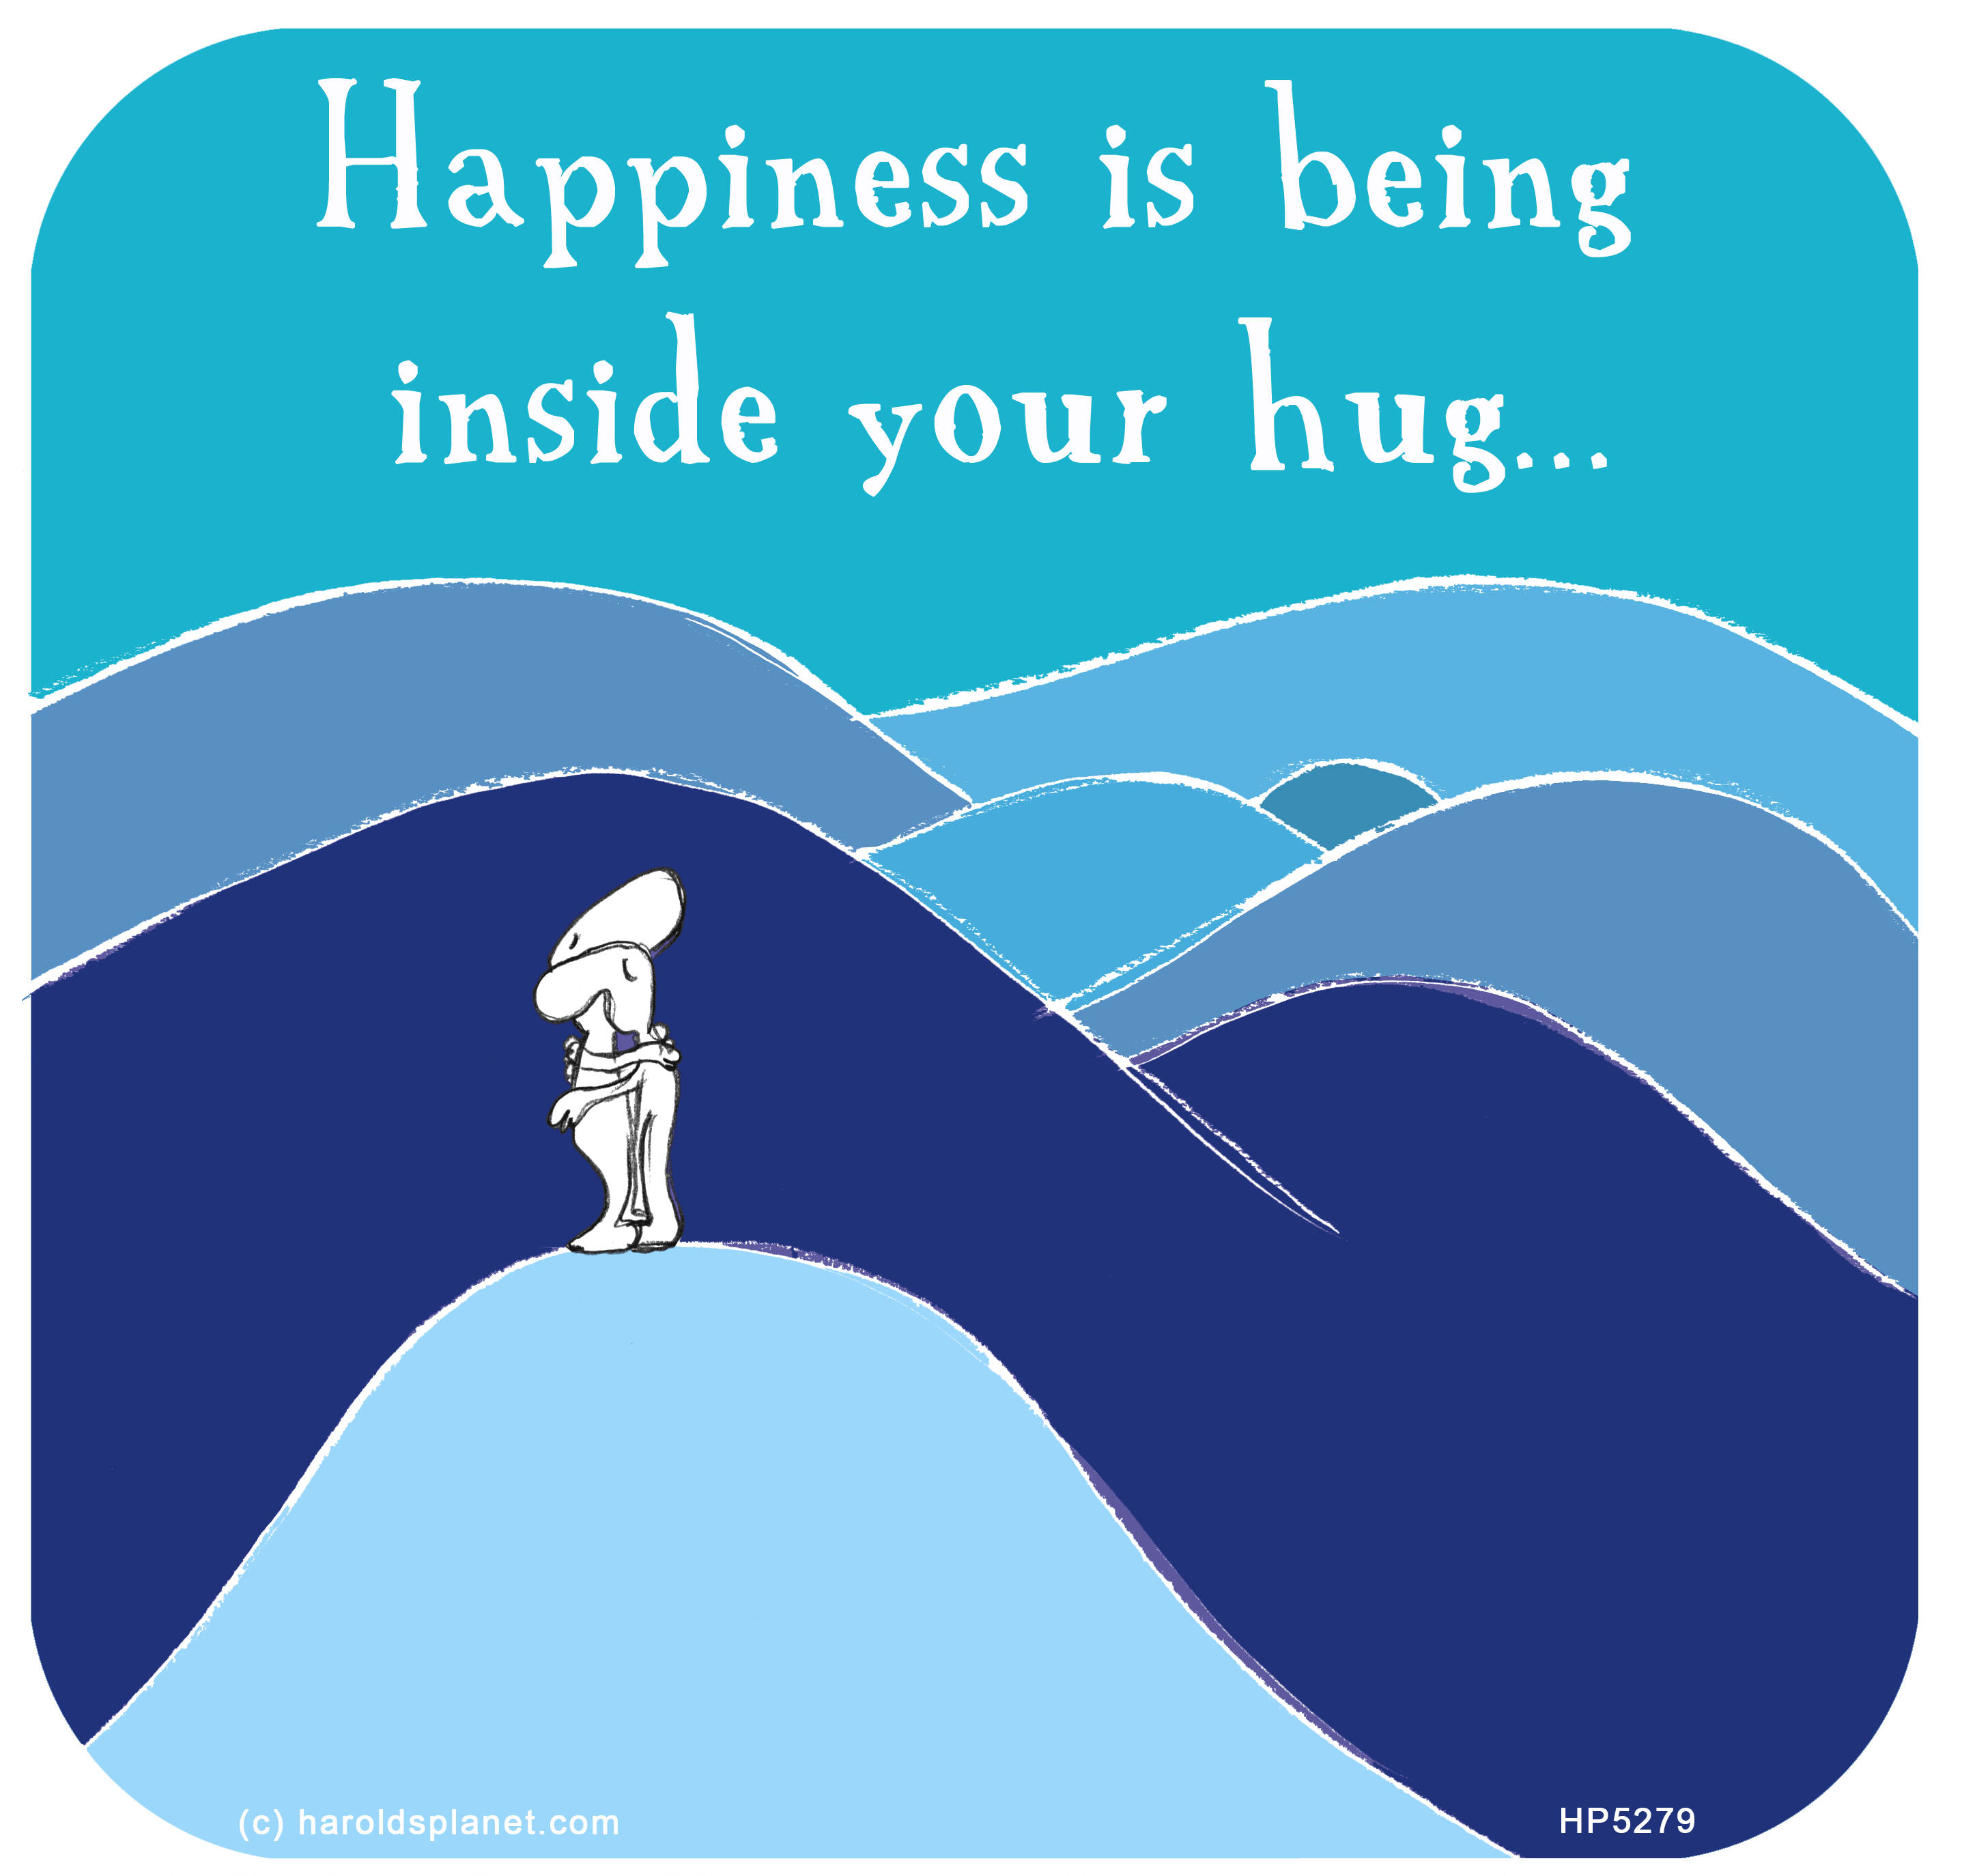 Harold's Planet: Happiness is being inside your hug...